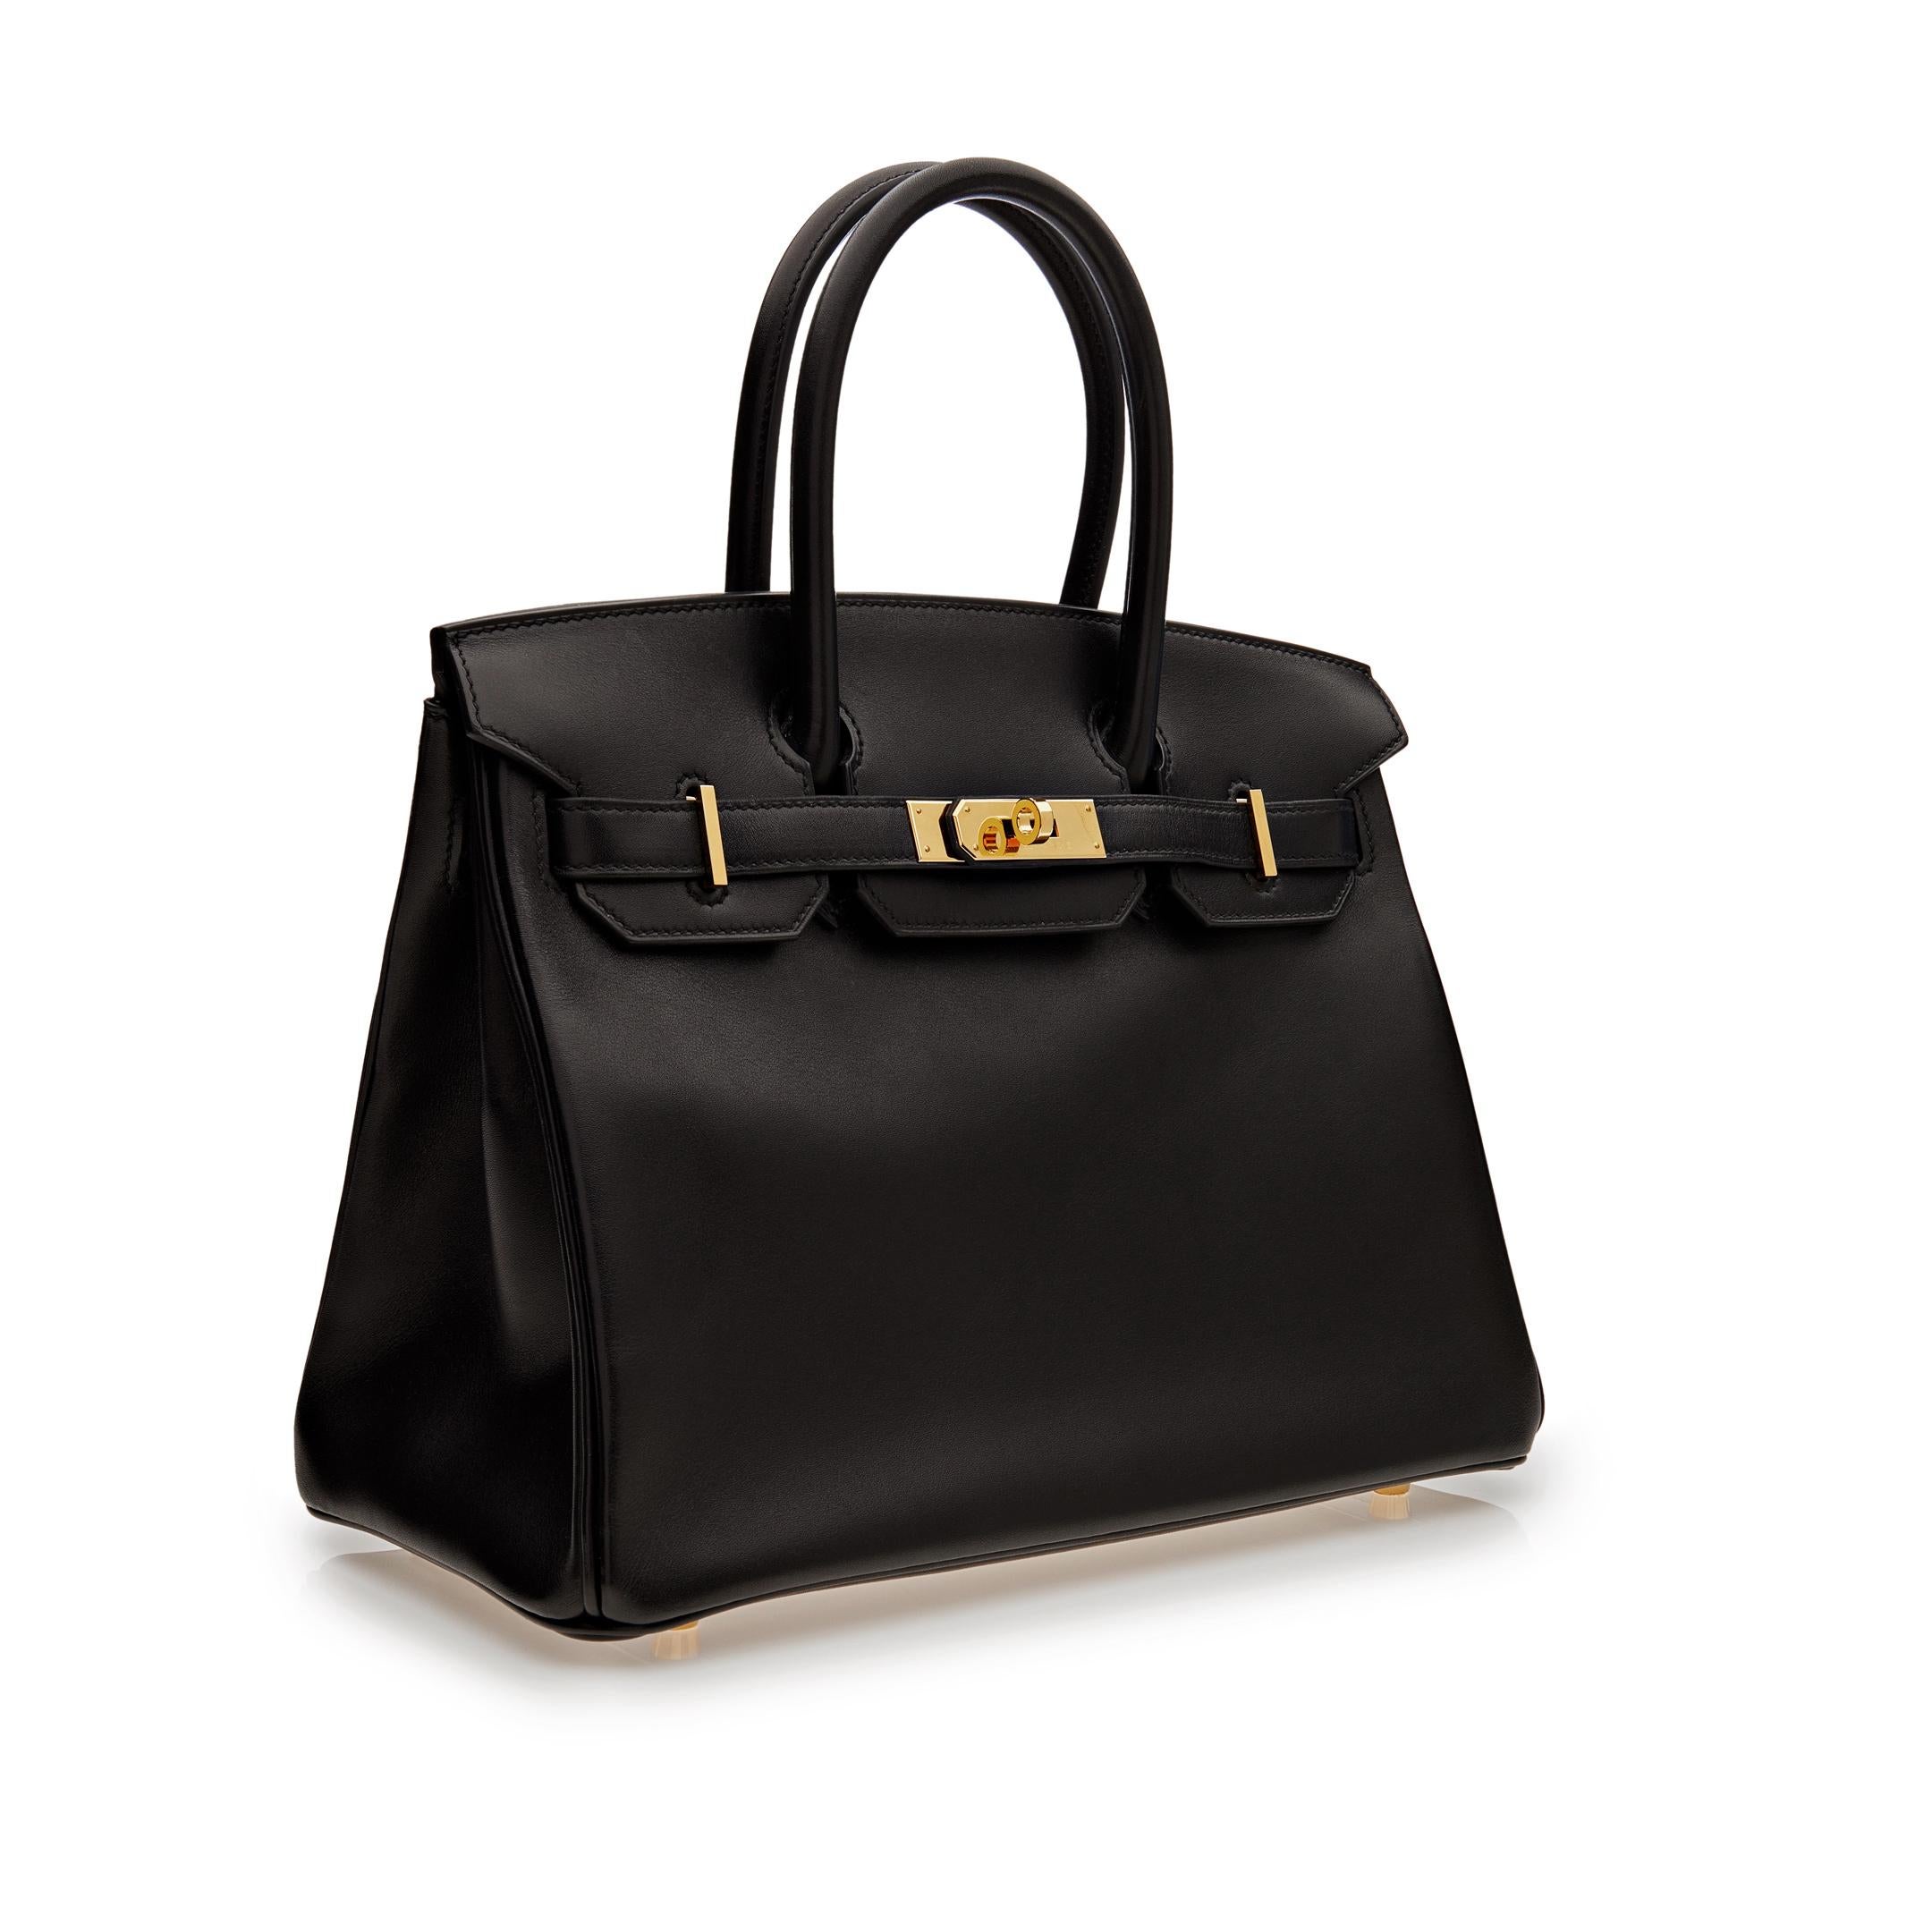 Hermes Birkin 30 Black Box Leather Gold Hardware In Good Condition For Sale In New York, NY